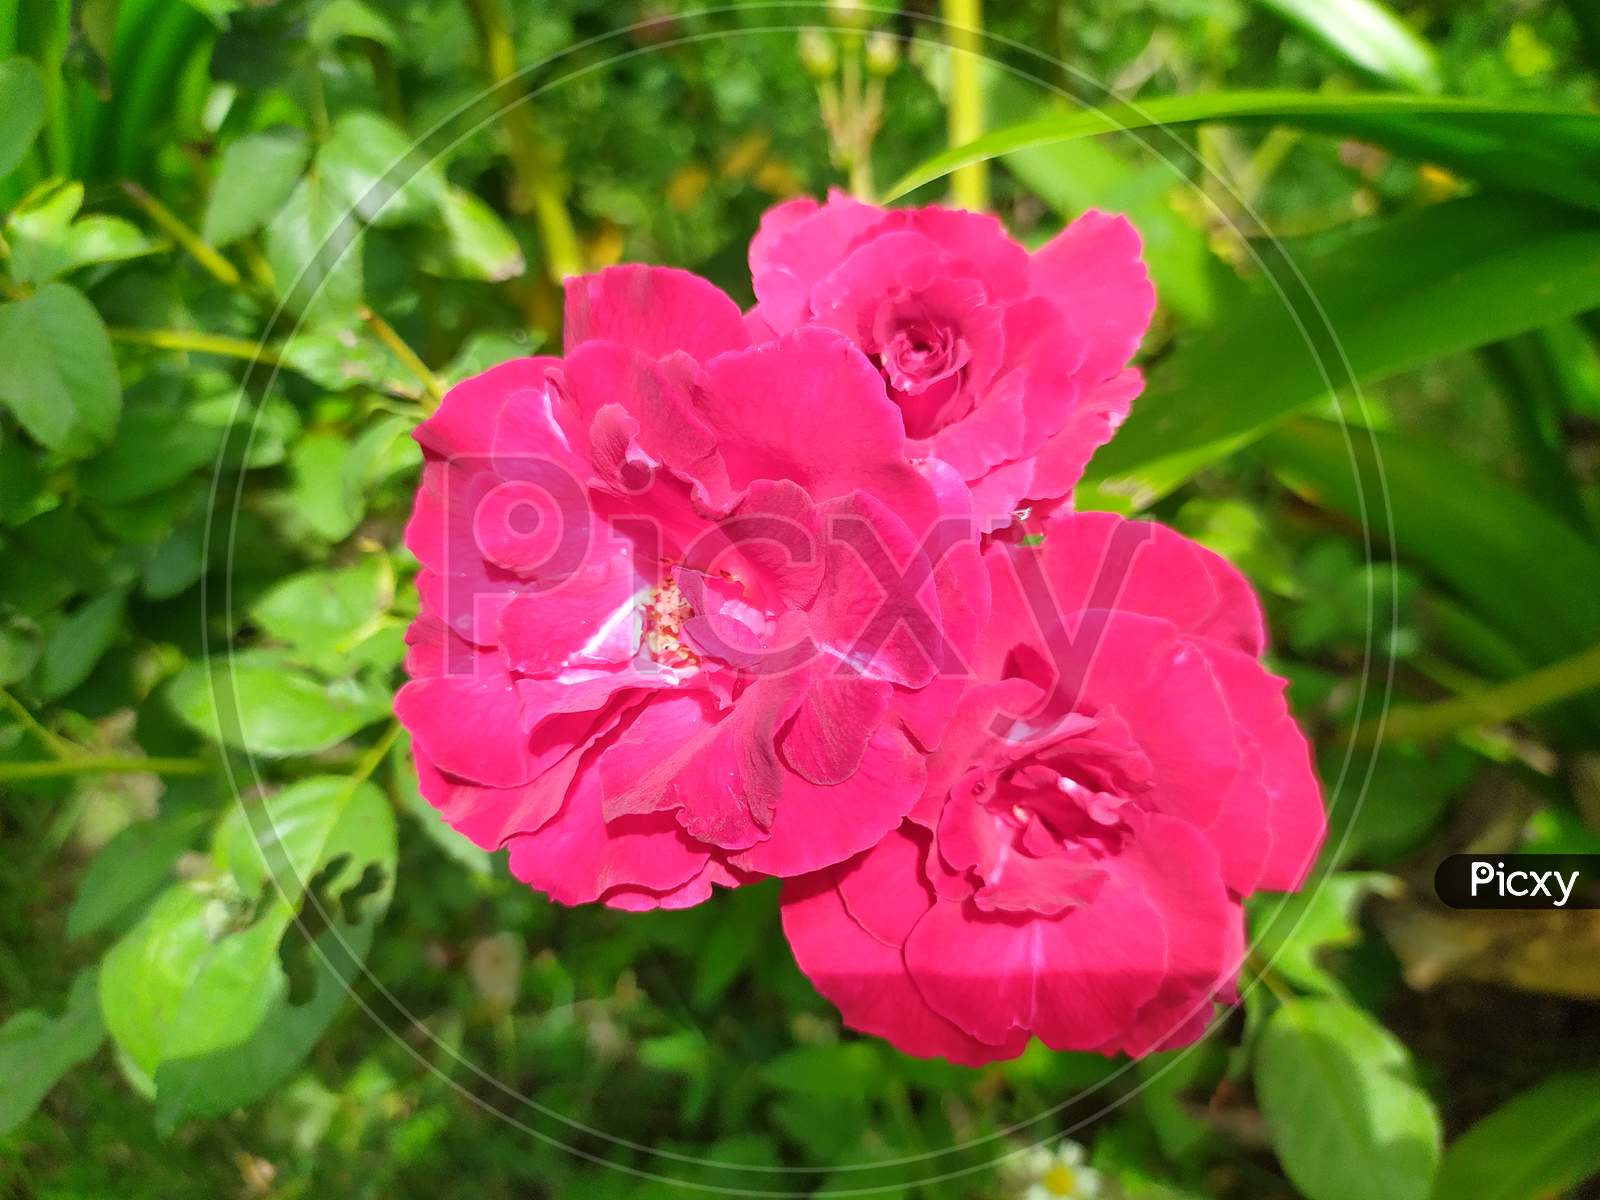 This is a Red flower image